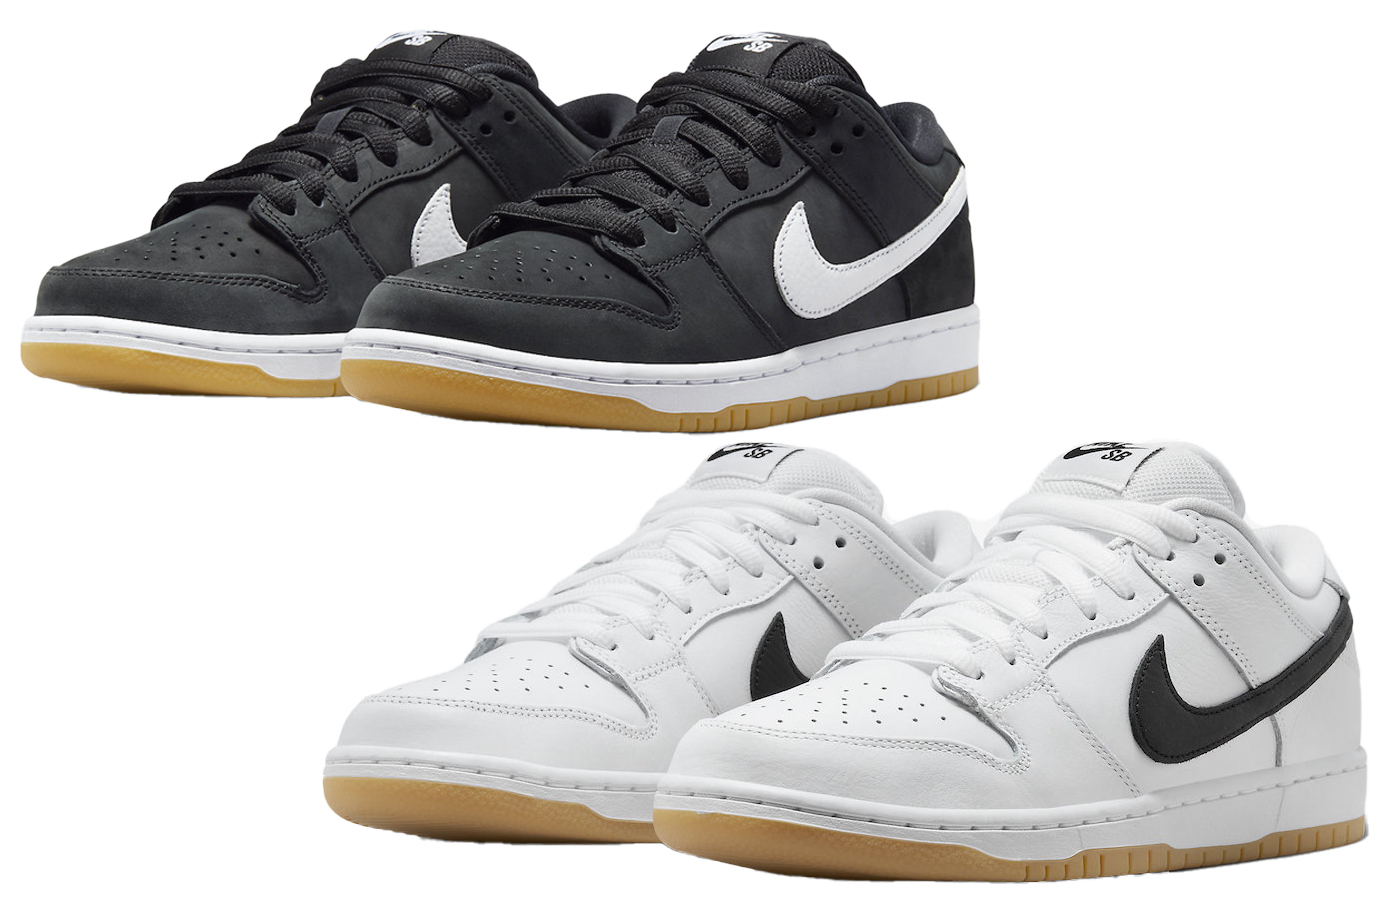 The Nike SB Dunk is Getting a 